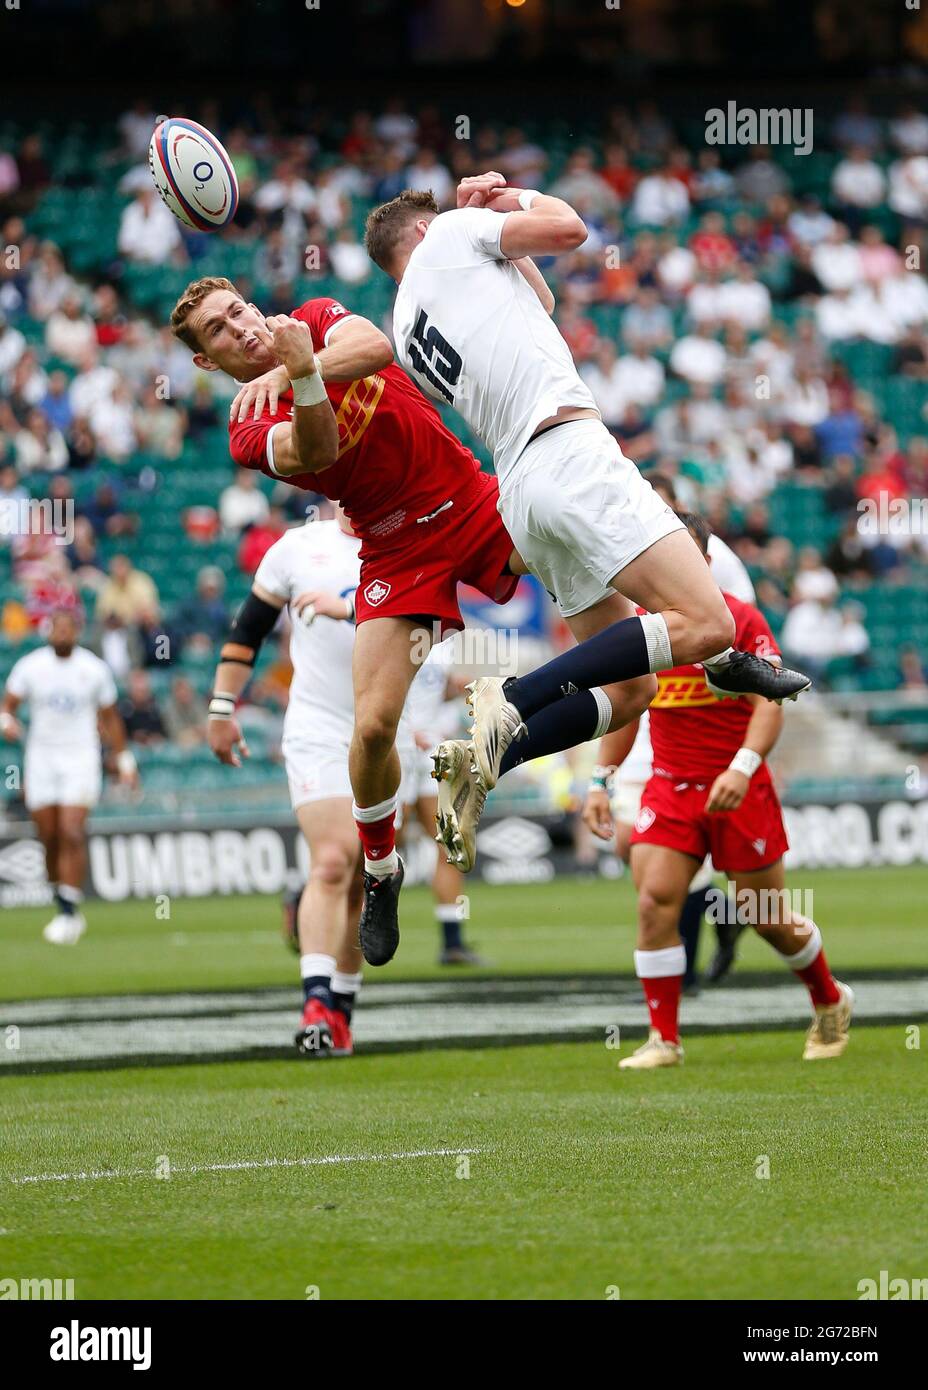 Twickenham, Londra, Regno Unito. 10 luglio 2021. International Rugby Union England Versus Canada; The Two 15's Challenging for ball Freddie Steward of England and Cooper Coats of Canada Credit: Action Plus Sports/Alamy Live News Foto Stock